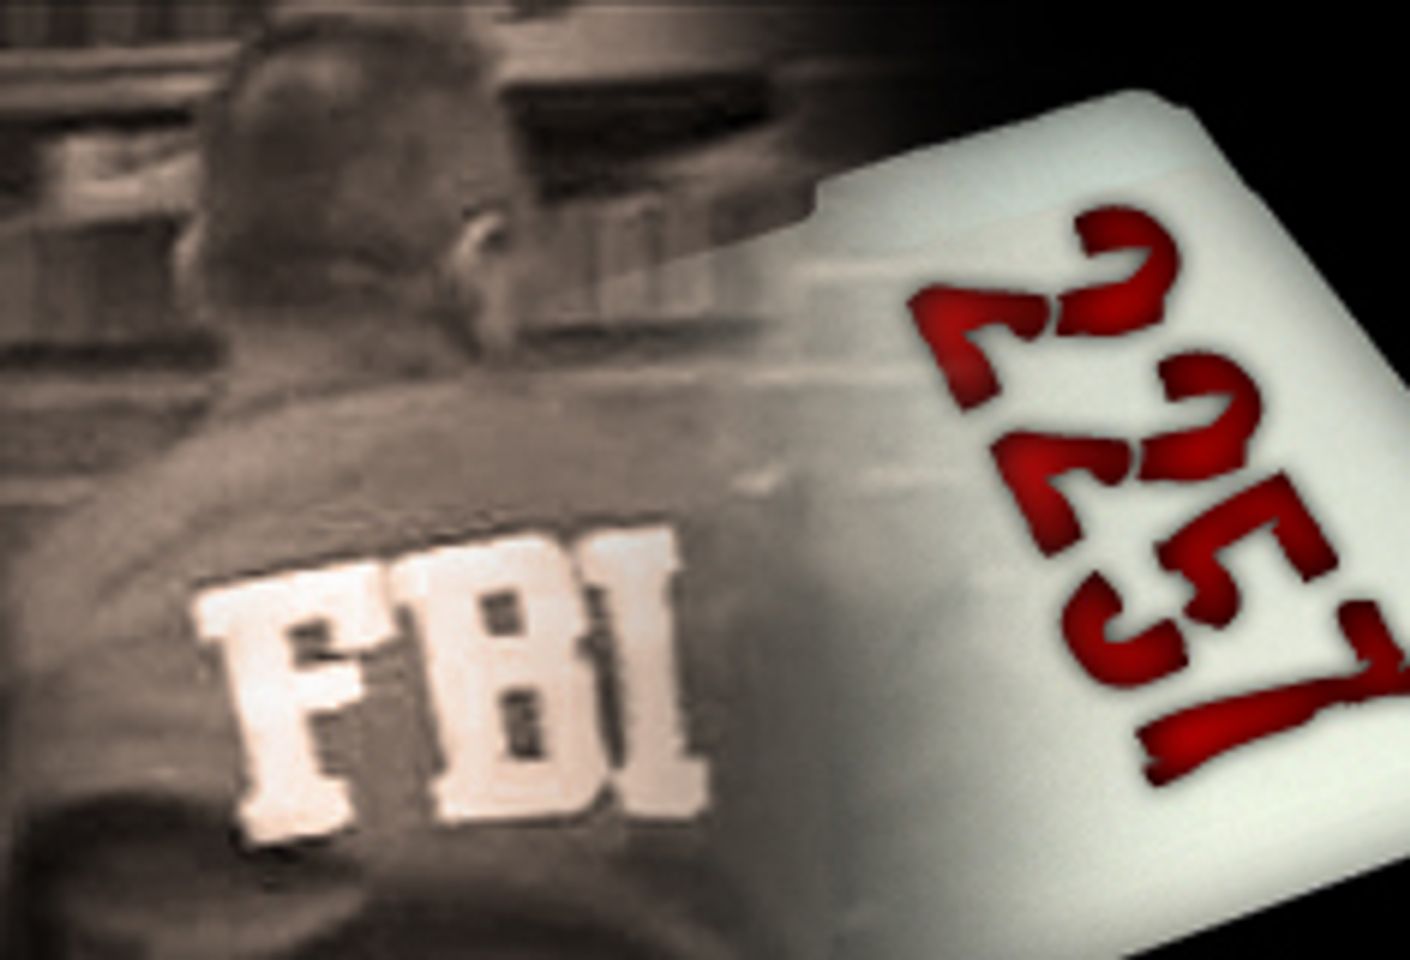 FBI Inspects Filmco Productions 2257 Records